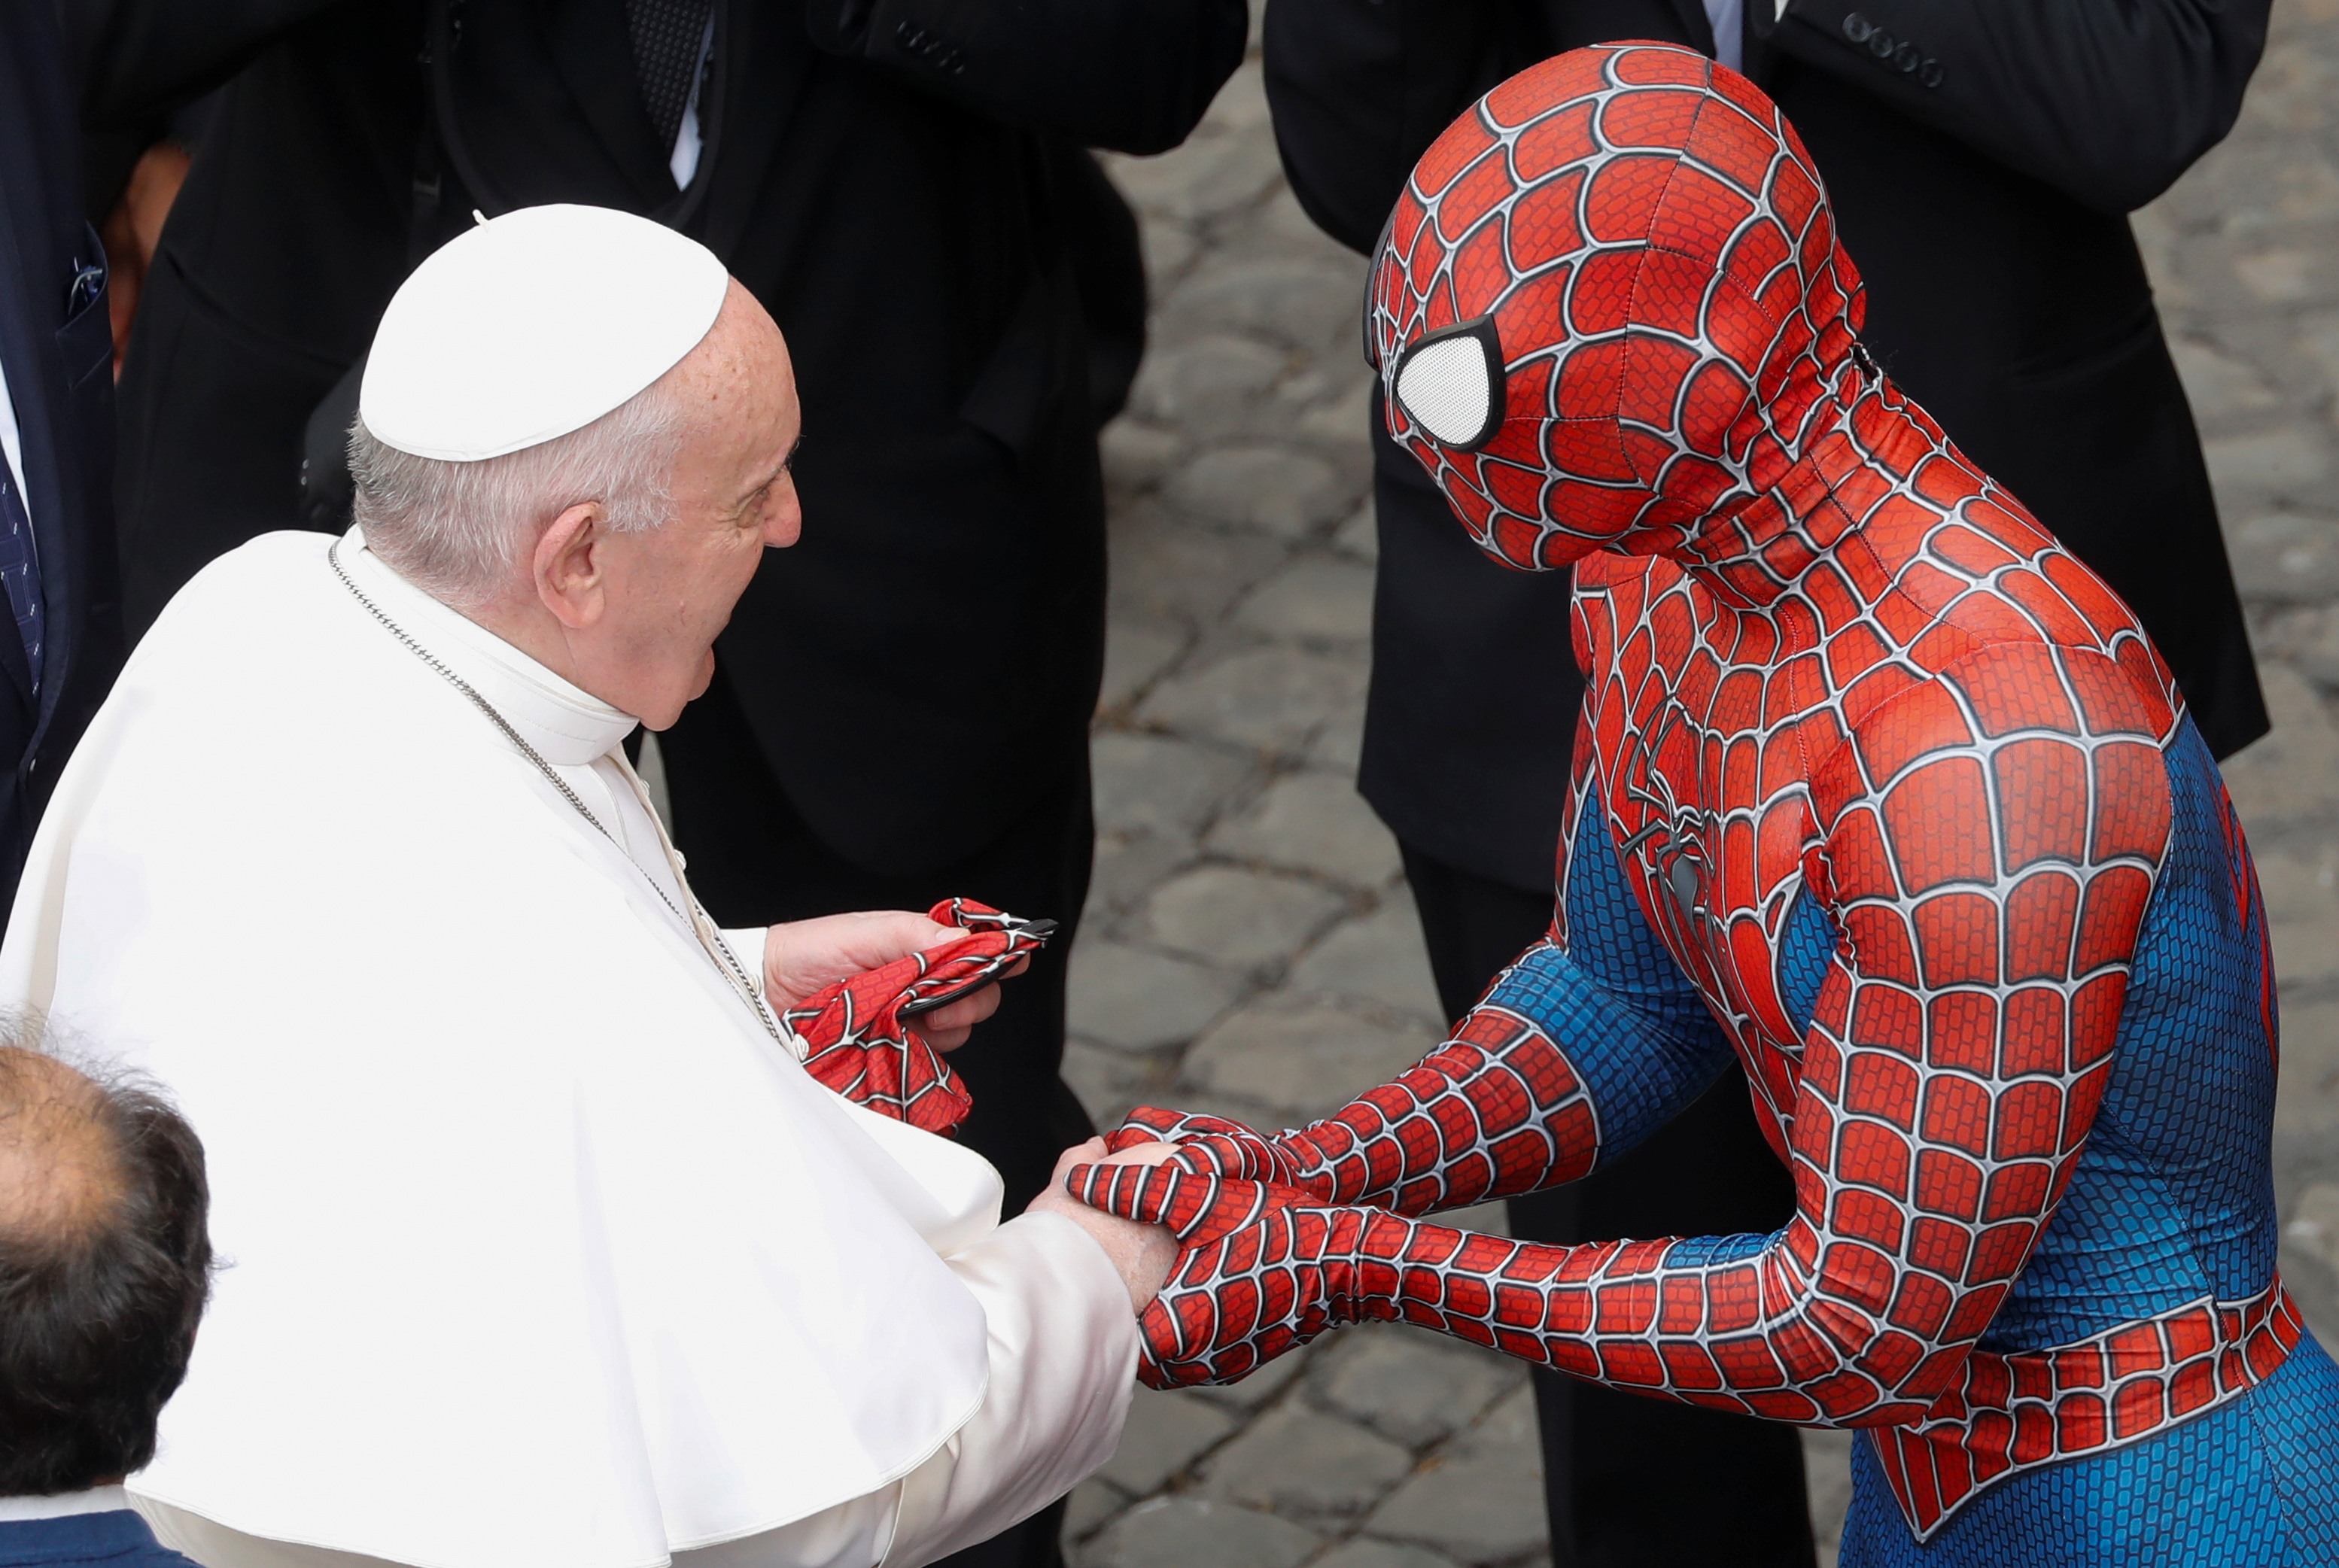 Pope Francis greets a person dressed as Spiderman after the general audience, amid the coronavirus disease (COVID-19) pandemic, at the Vatican, June 23, 2021. REUTERS/Remo Casilli